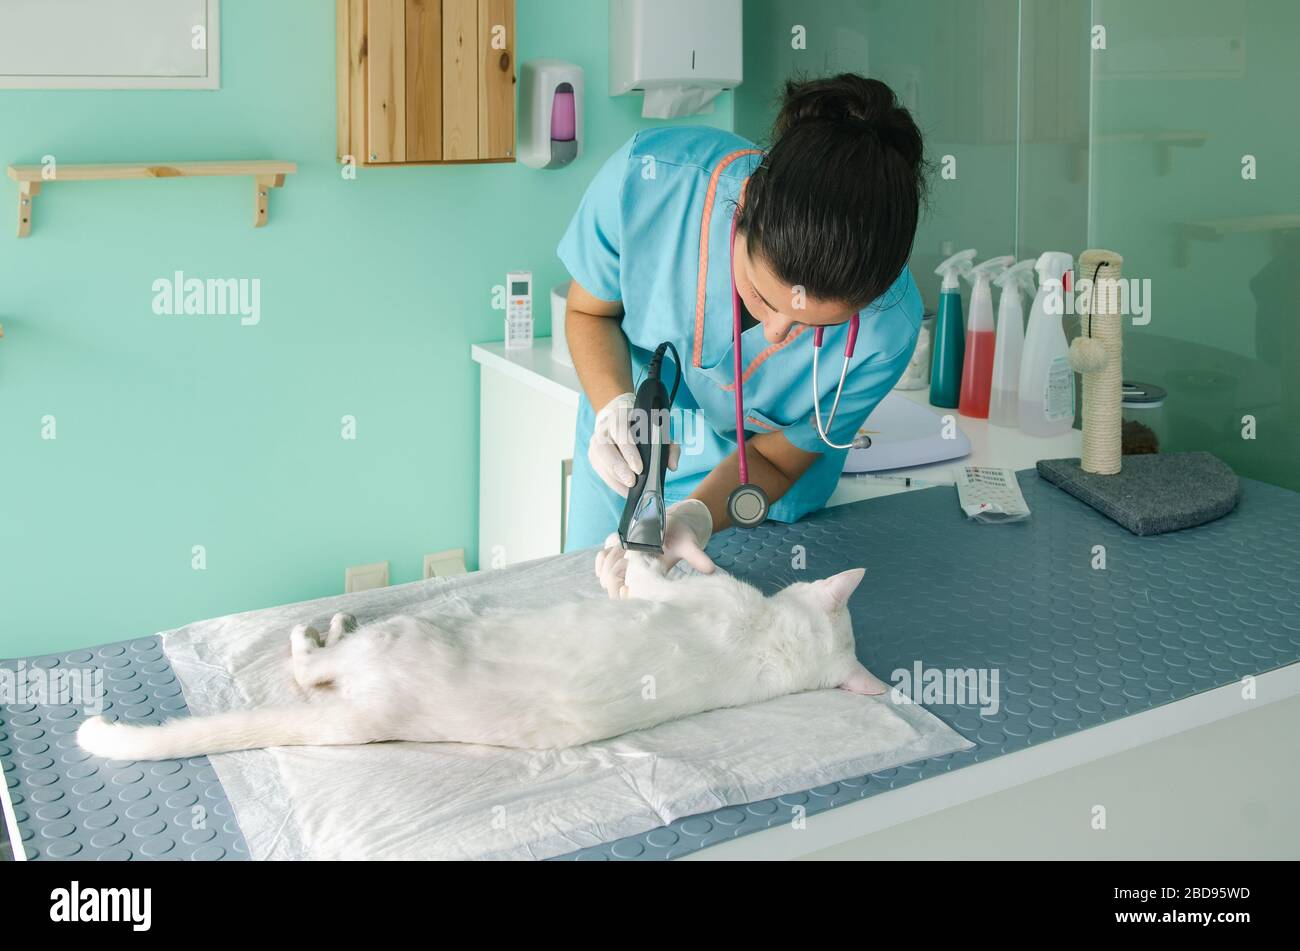 Doctors shearing a cattle to administer serum. Preparing animal for surgery Stock Photo